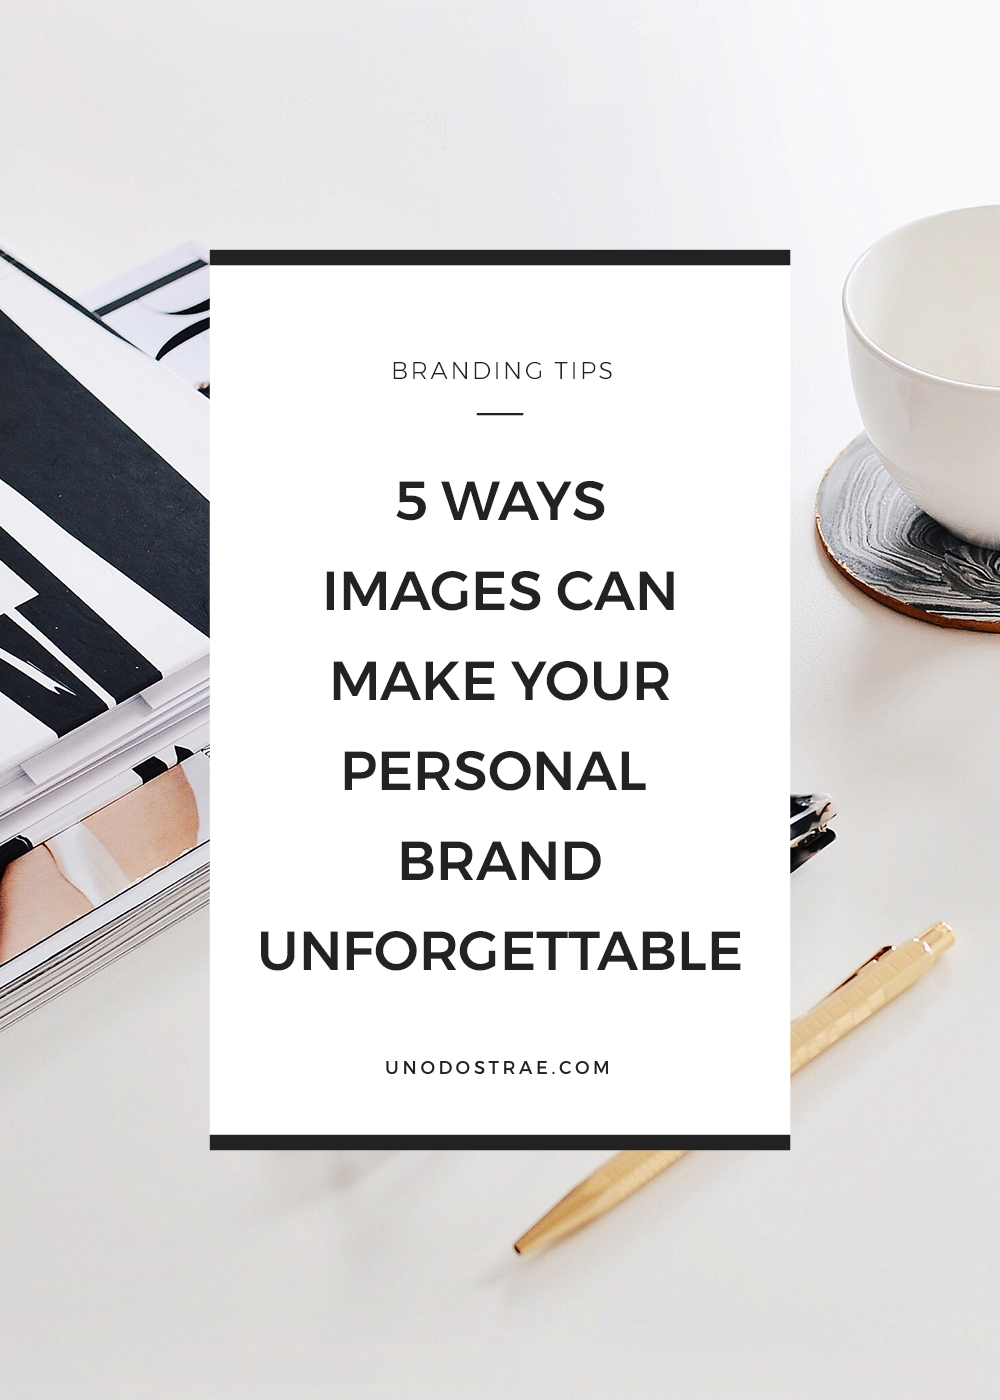 For entrepreneurs, your imagery can do amazing things for your personal brand.